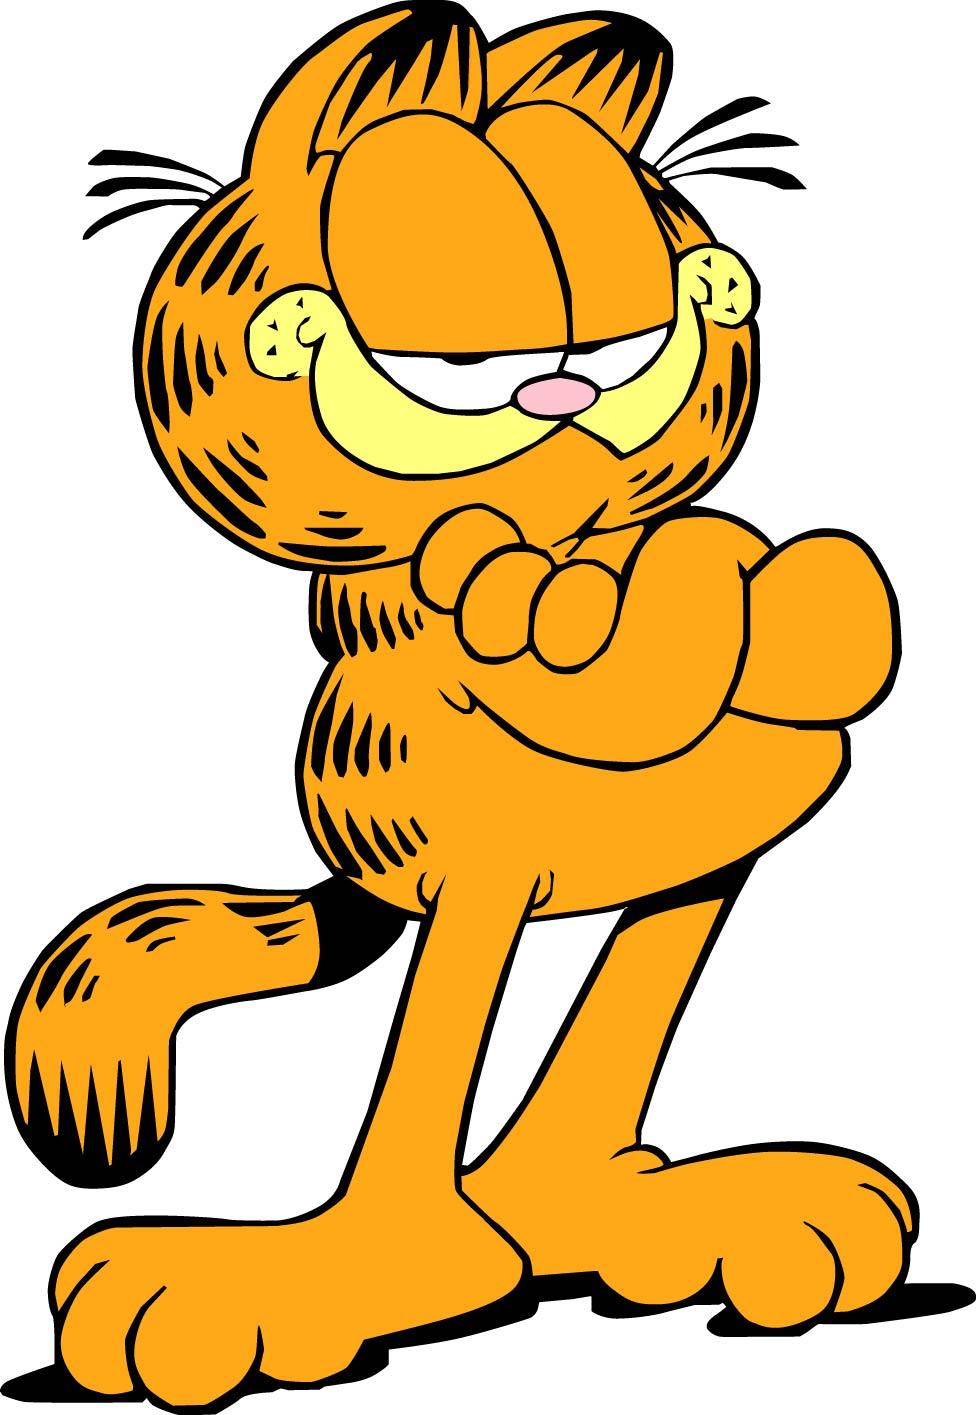 garmfeld  I made some Garfield wallpapers that are